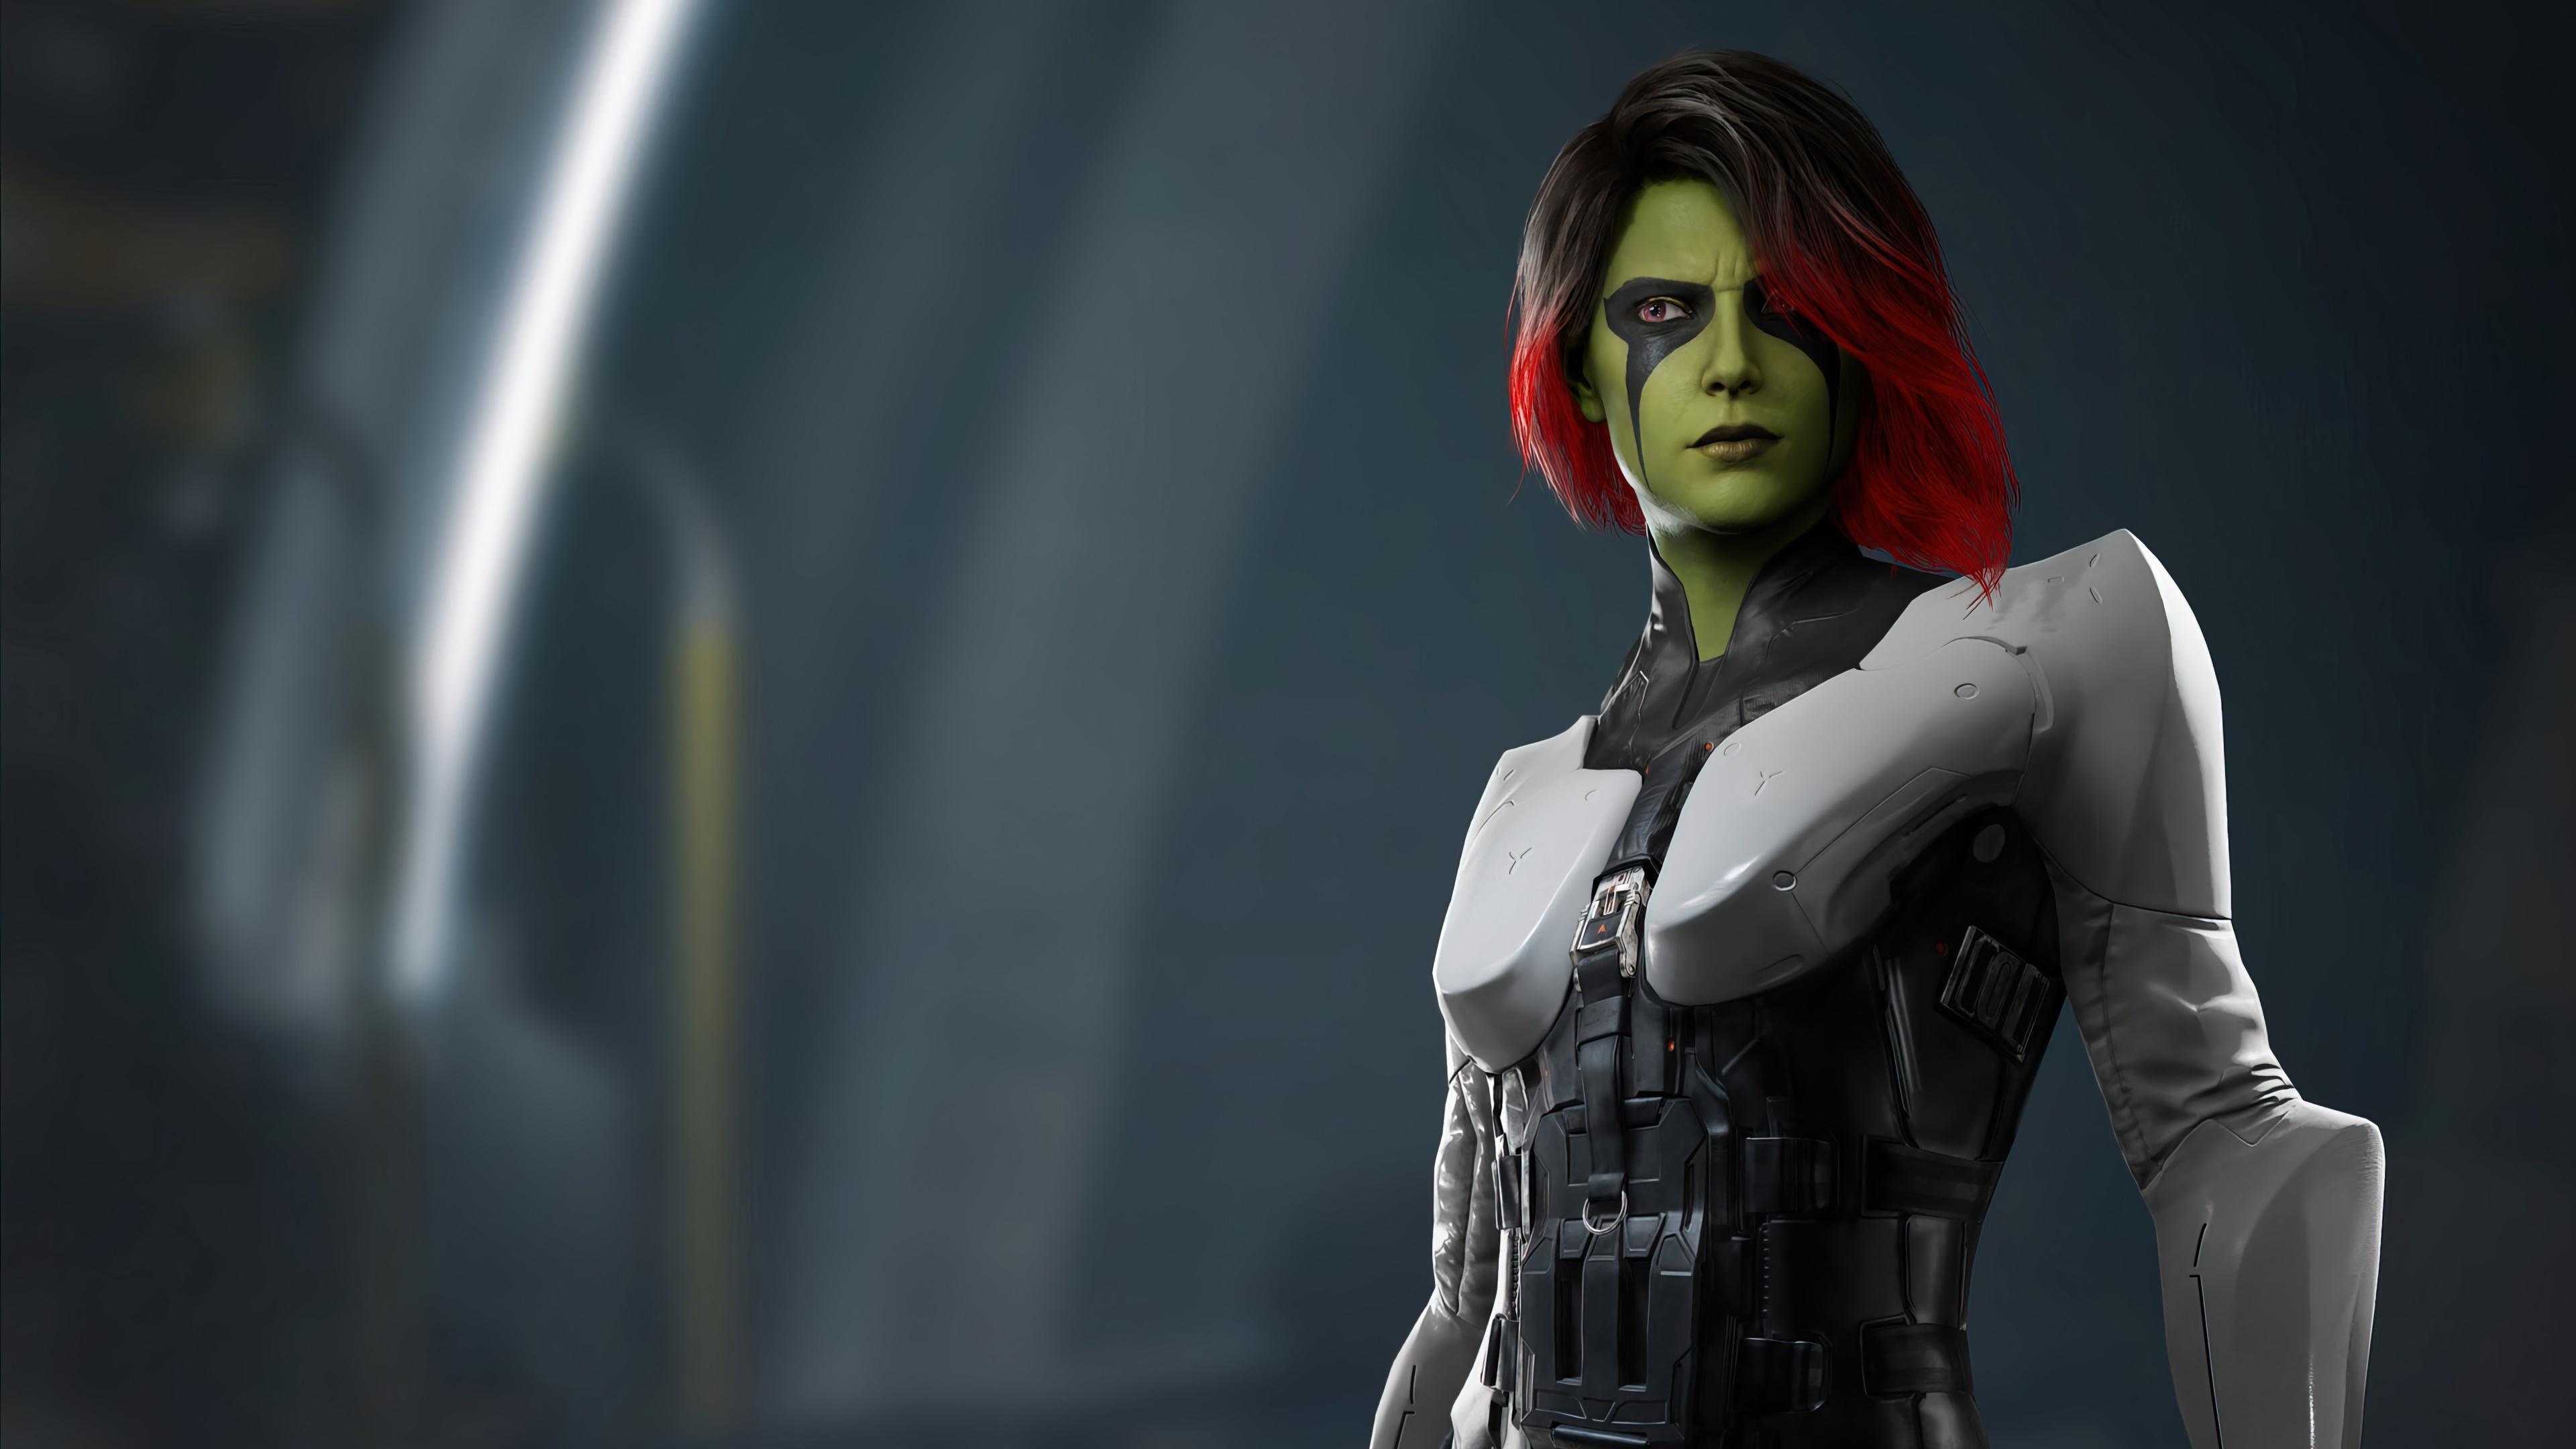 HD wallpaper, Game, 4K, Pc, Marvels Guardians Of The Galaxy, Gamora